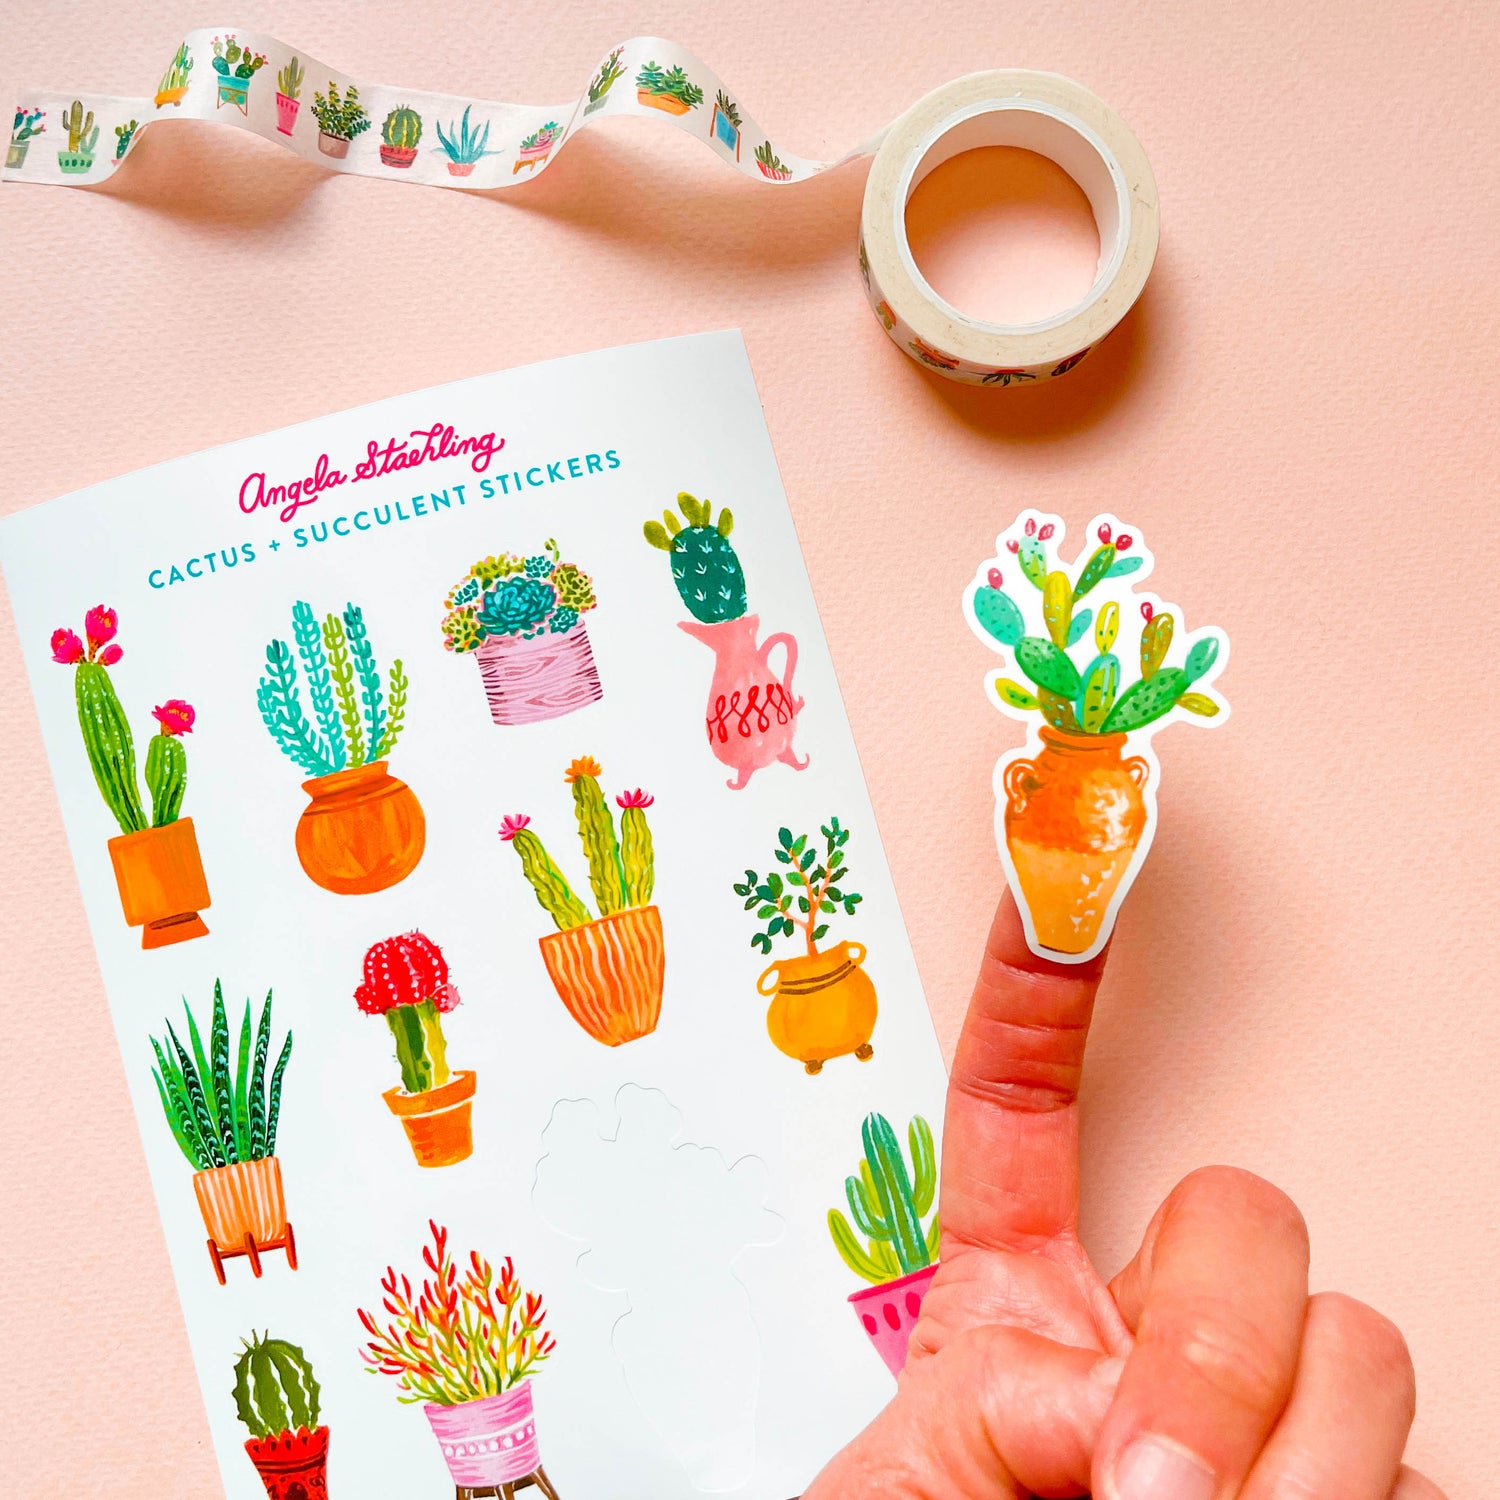 Prickly pear cactus sticker with cactus sticker sheet